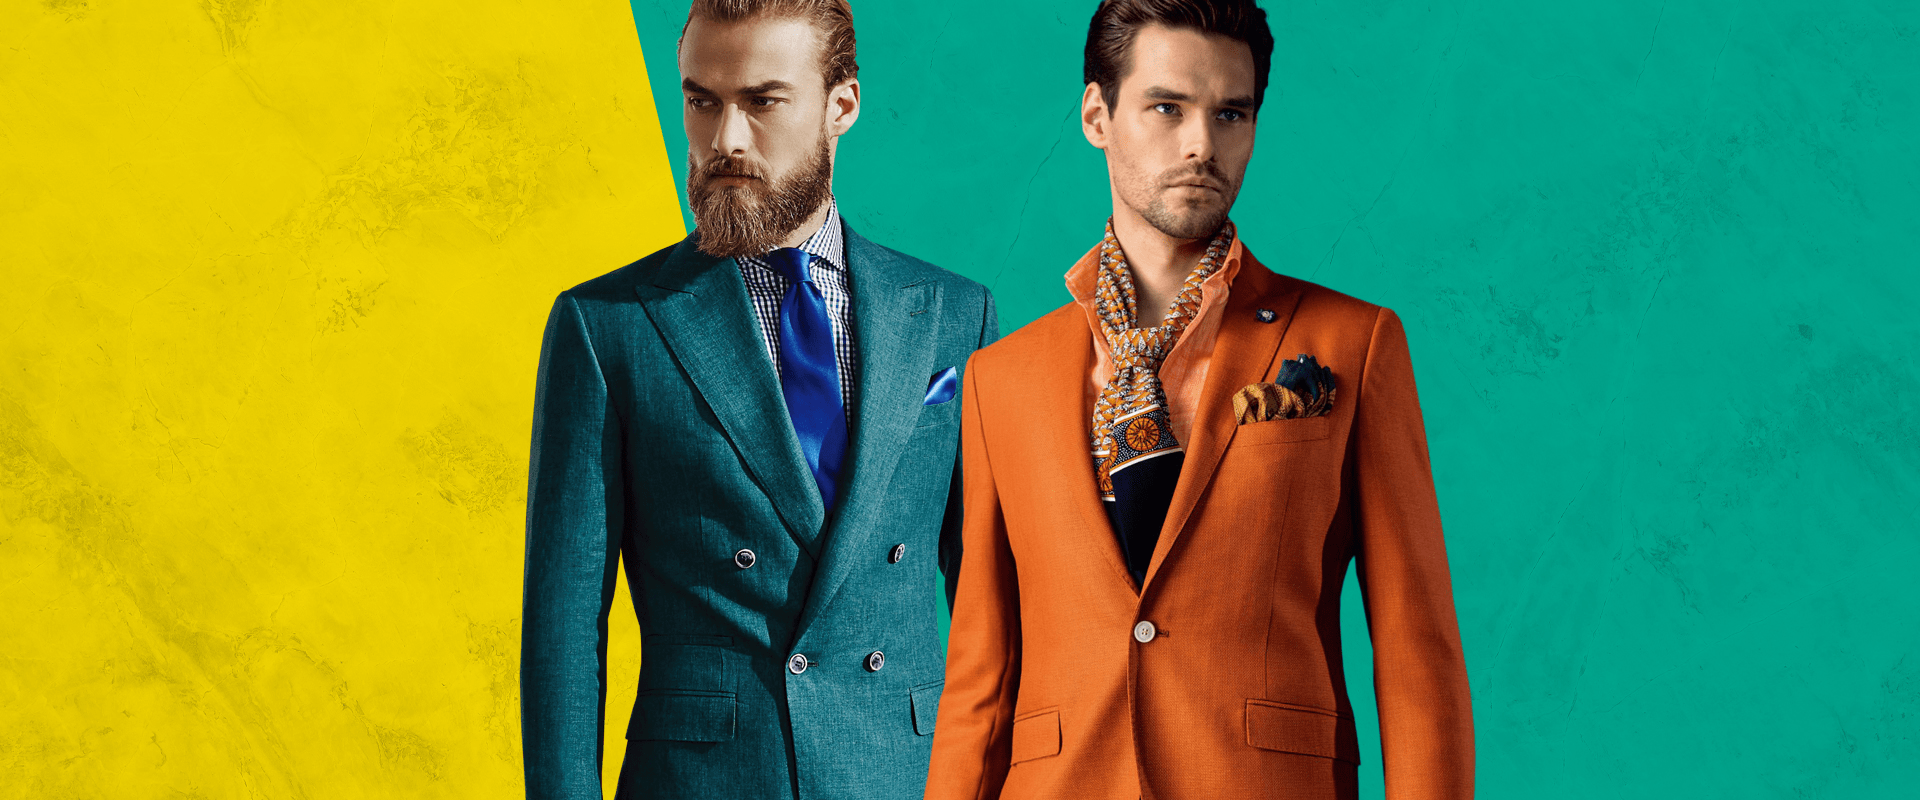 Germanicos bespoke tailor melbourne green and brown/orange suits